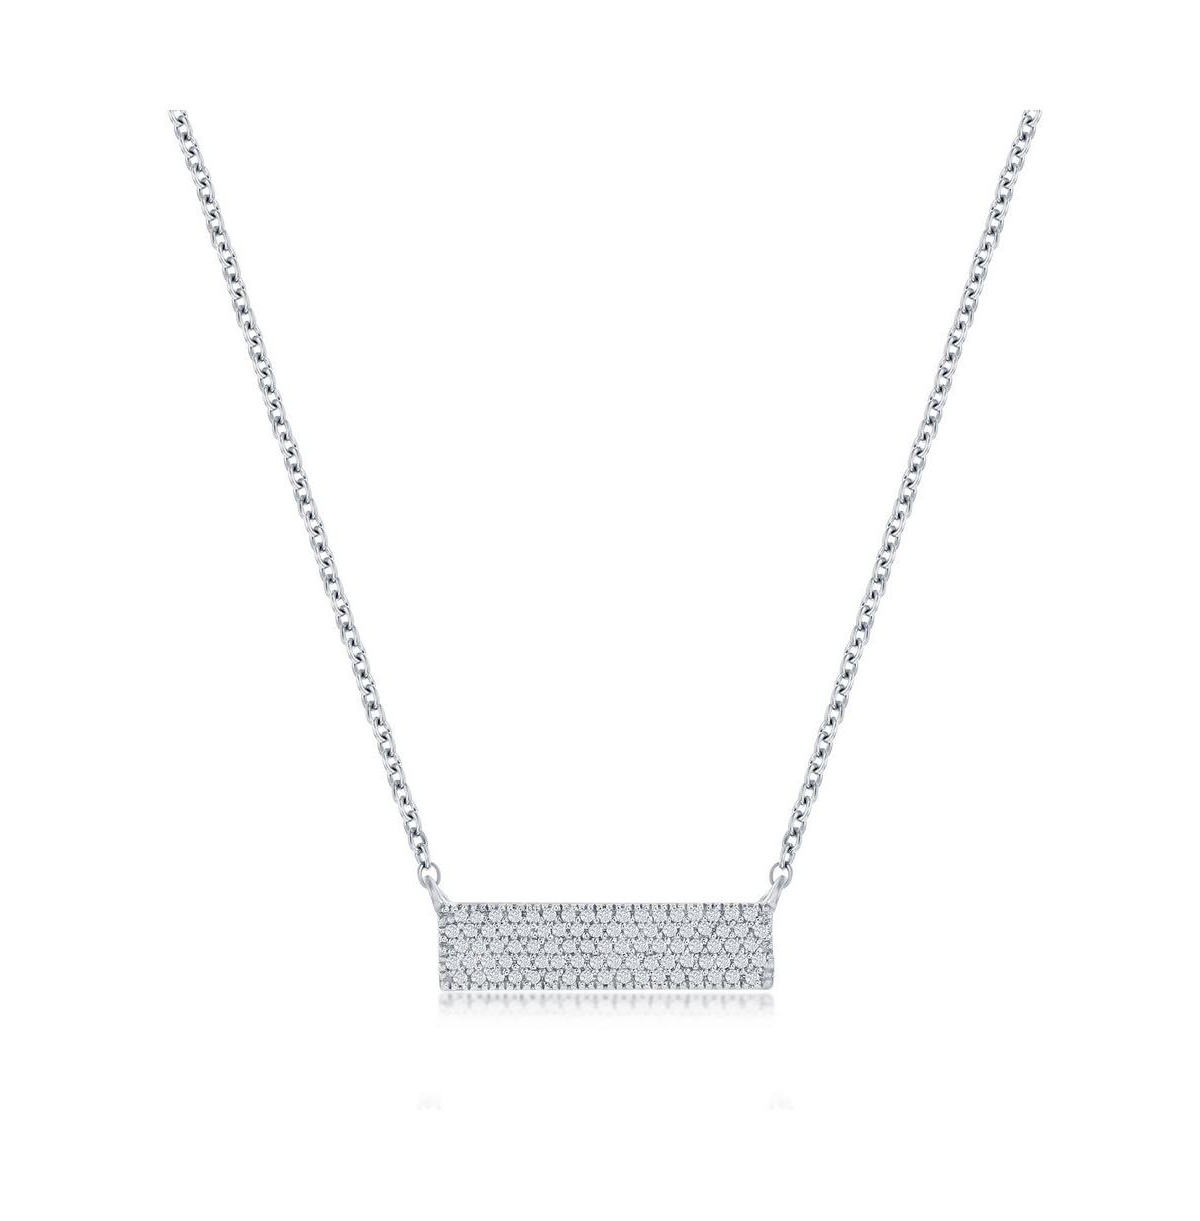 SIMONA RECTANGLE BAR DIAMOND NECKLACE (0.25 CT. T.W.) - 87 STONES IN STERLING SILVER